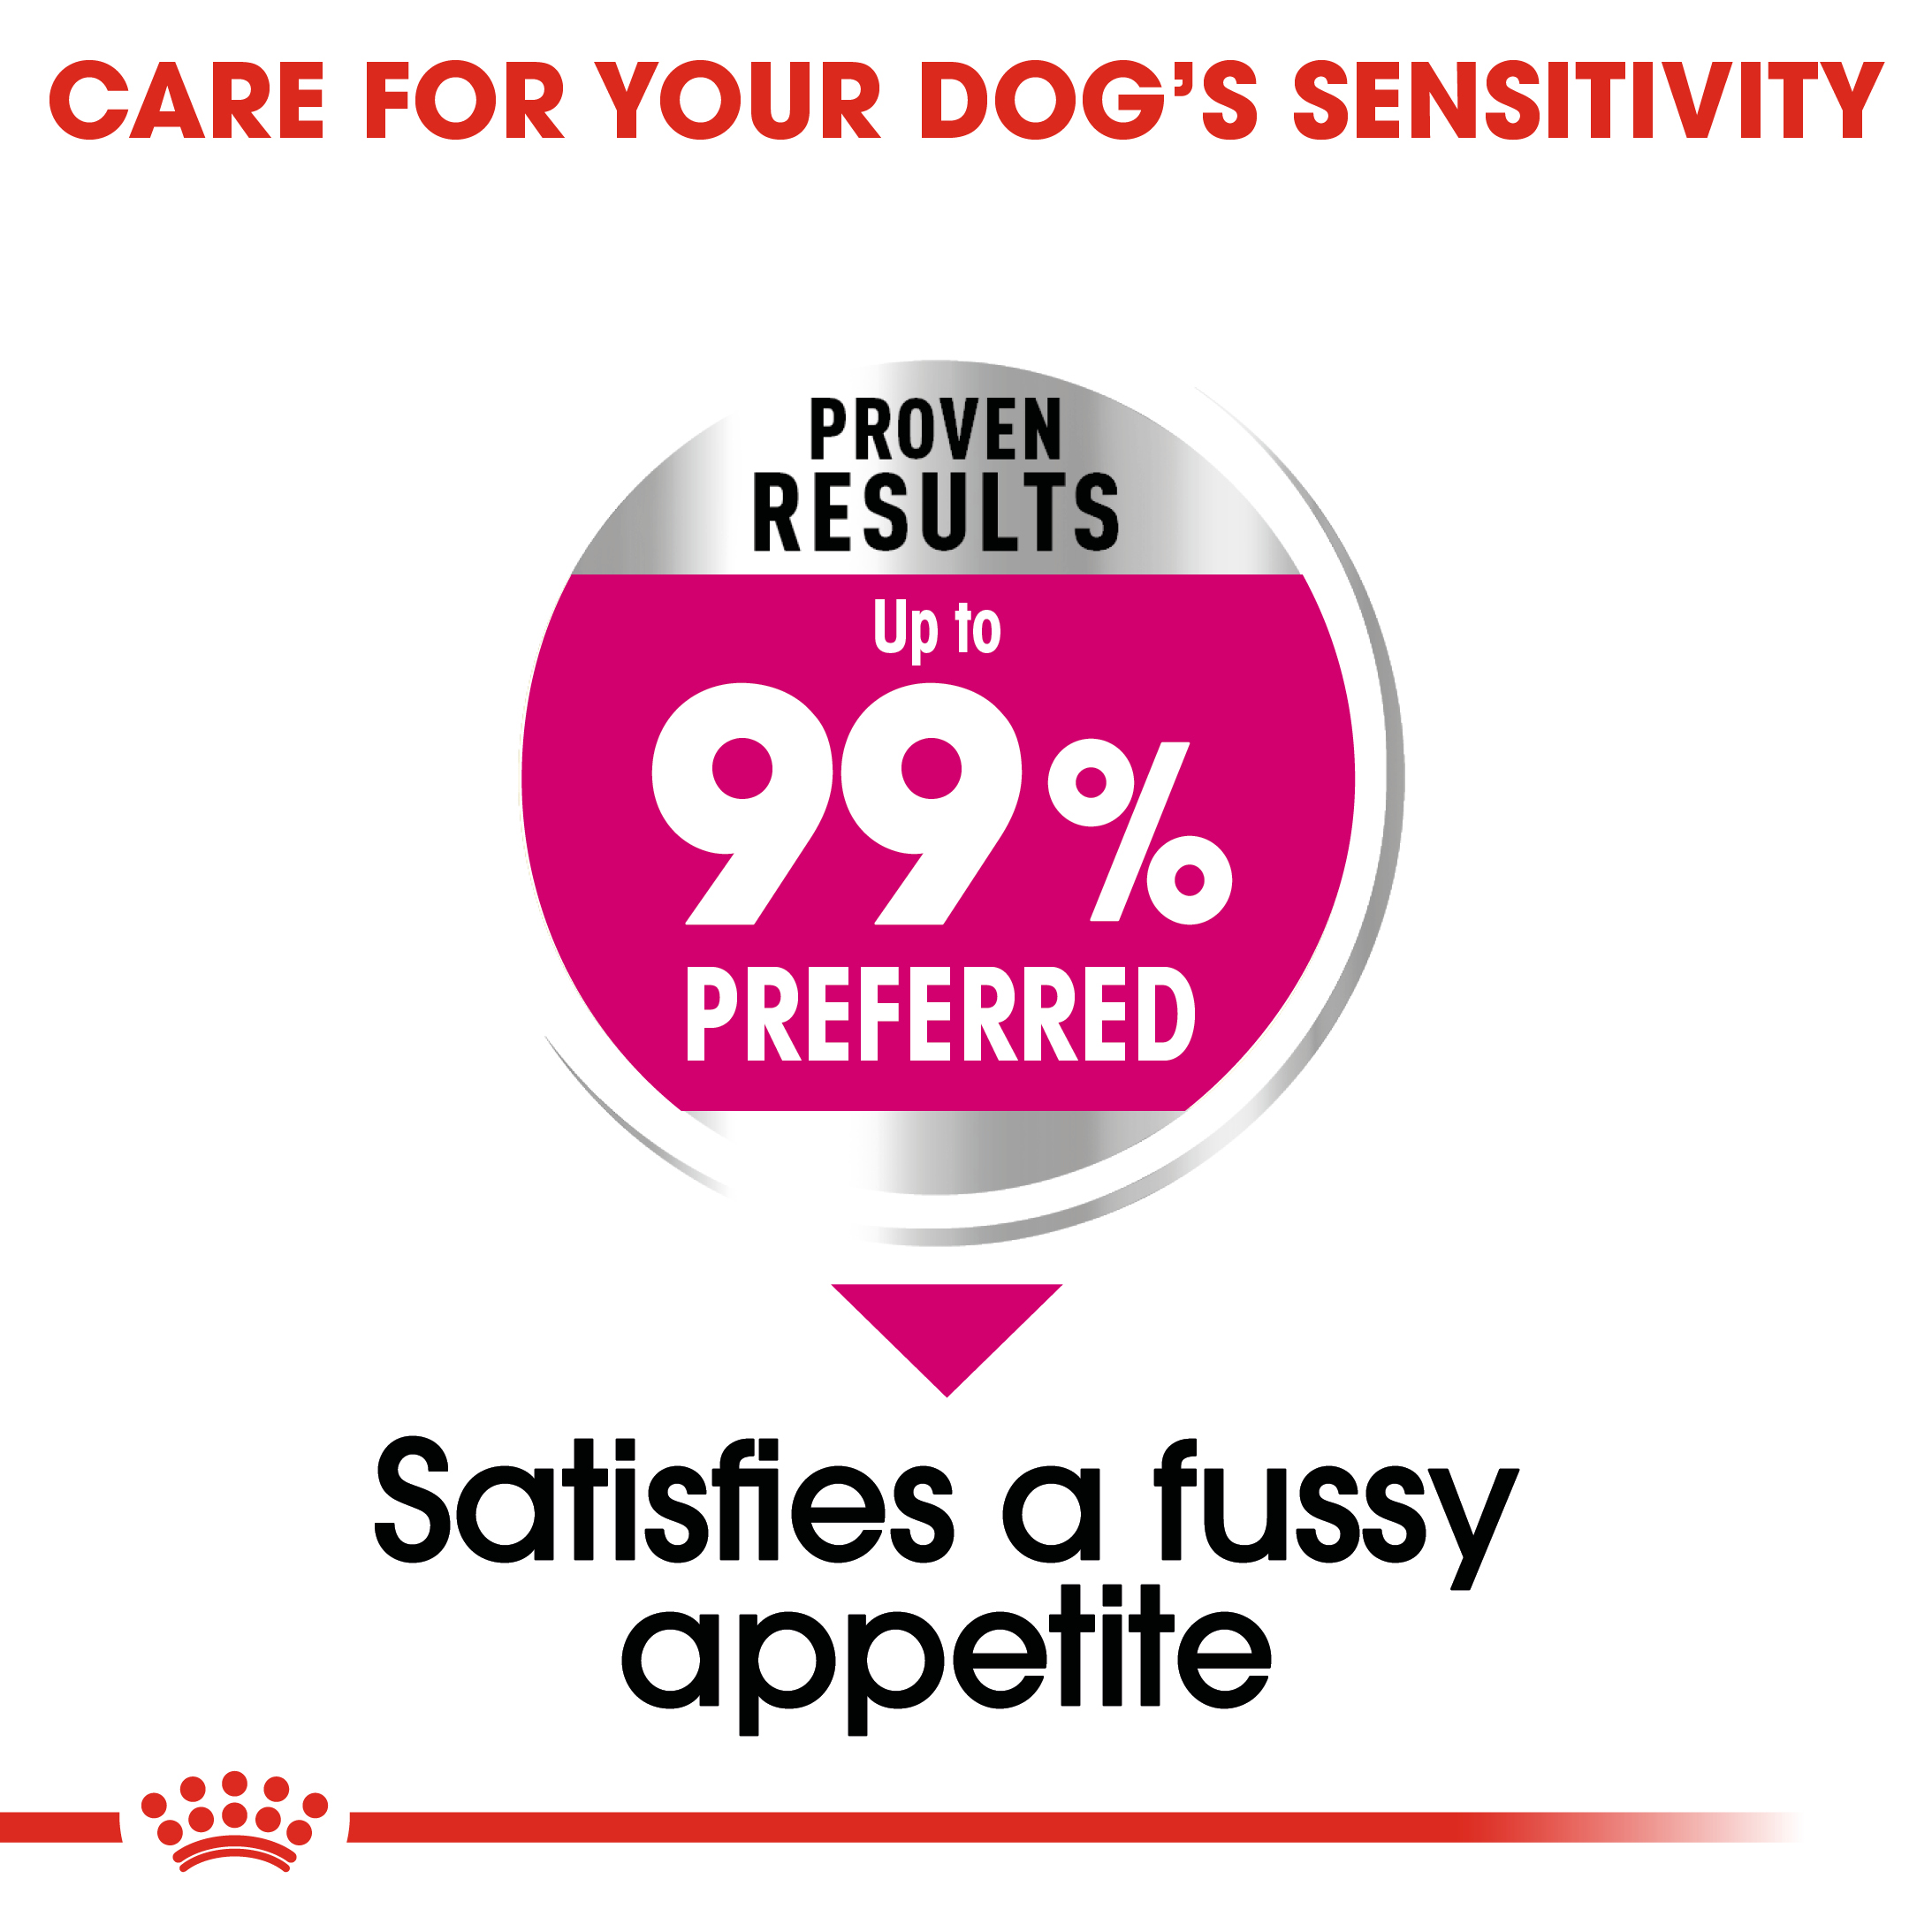 royal canin exigent small dogs